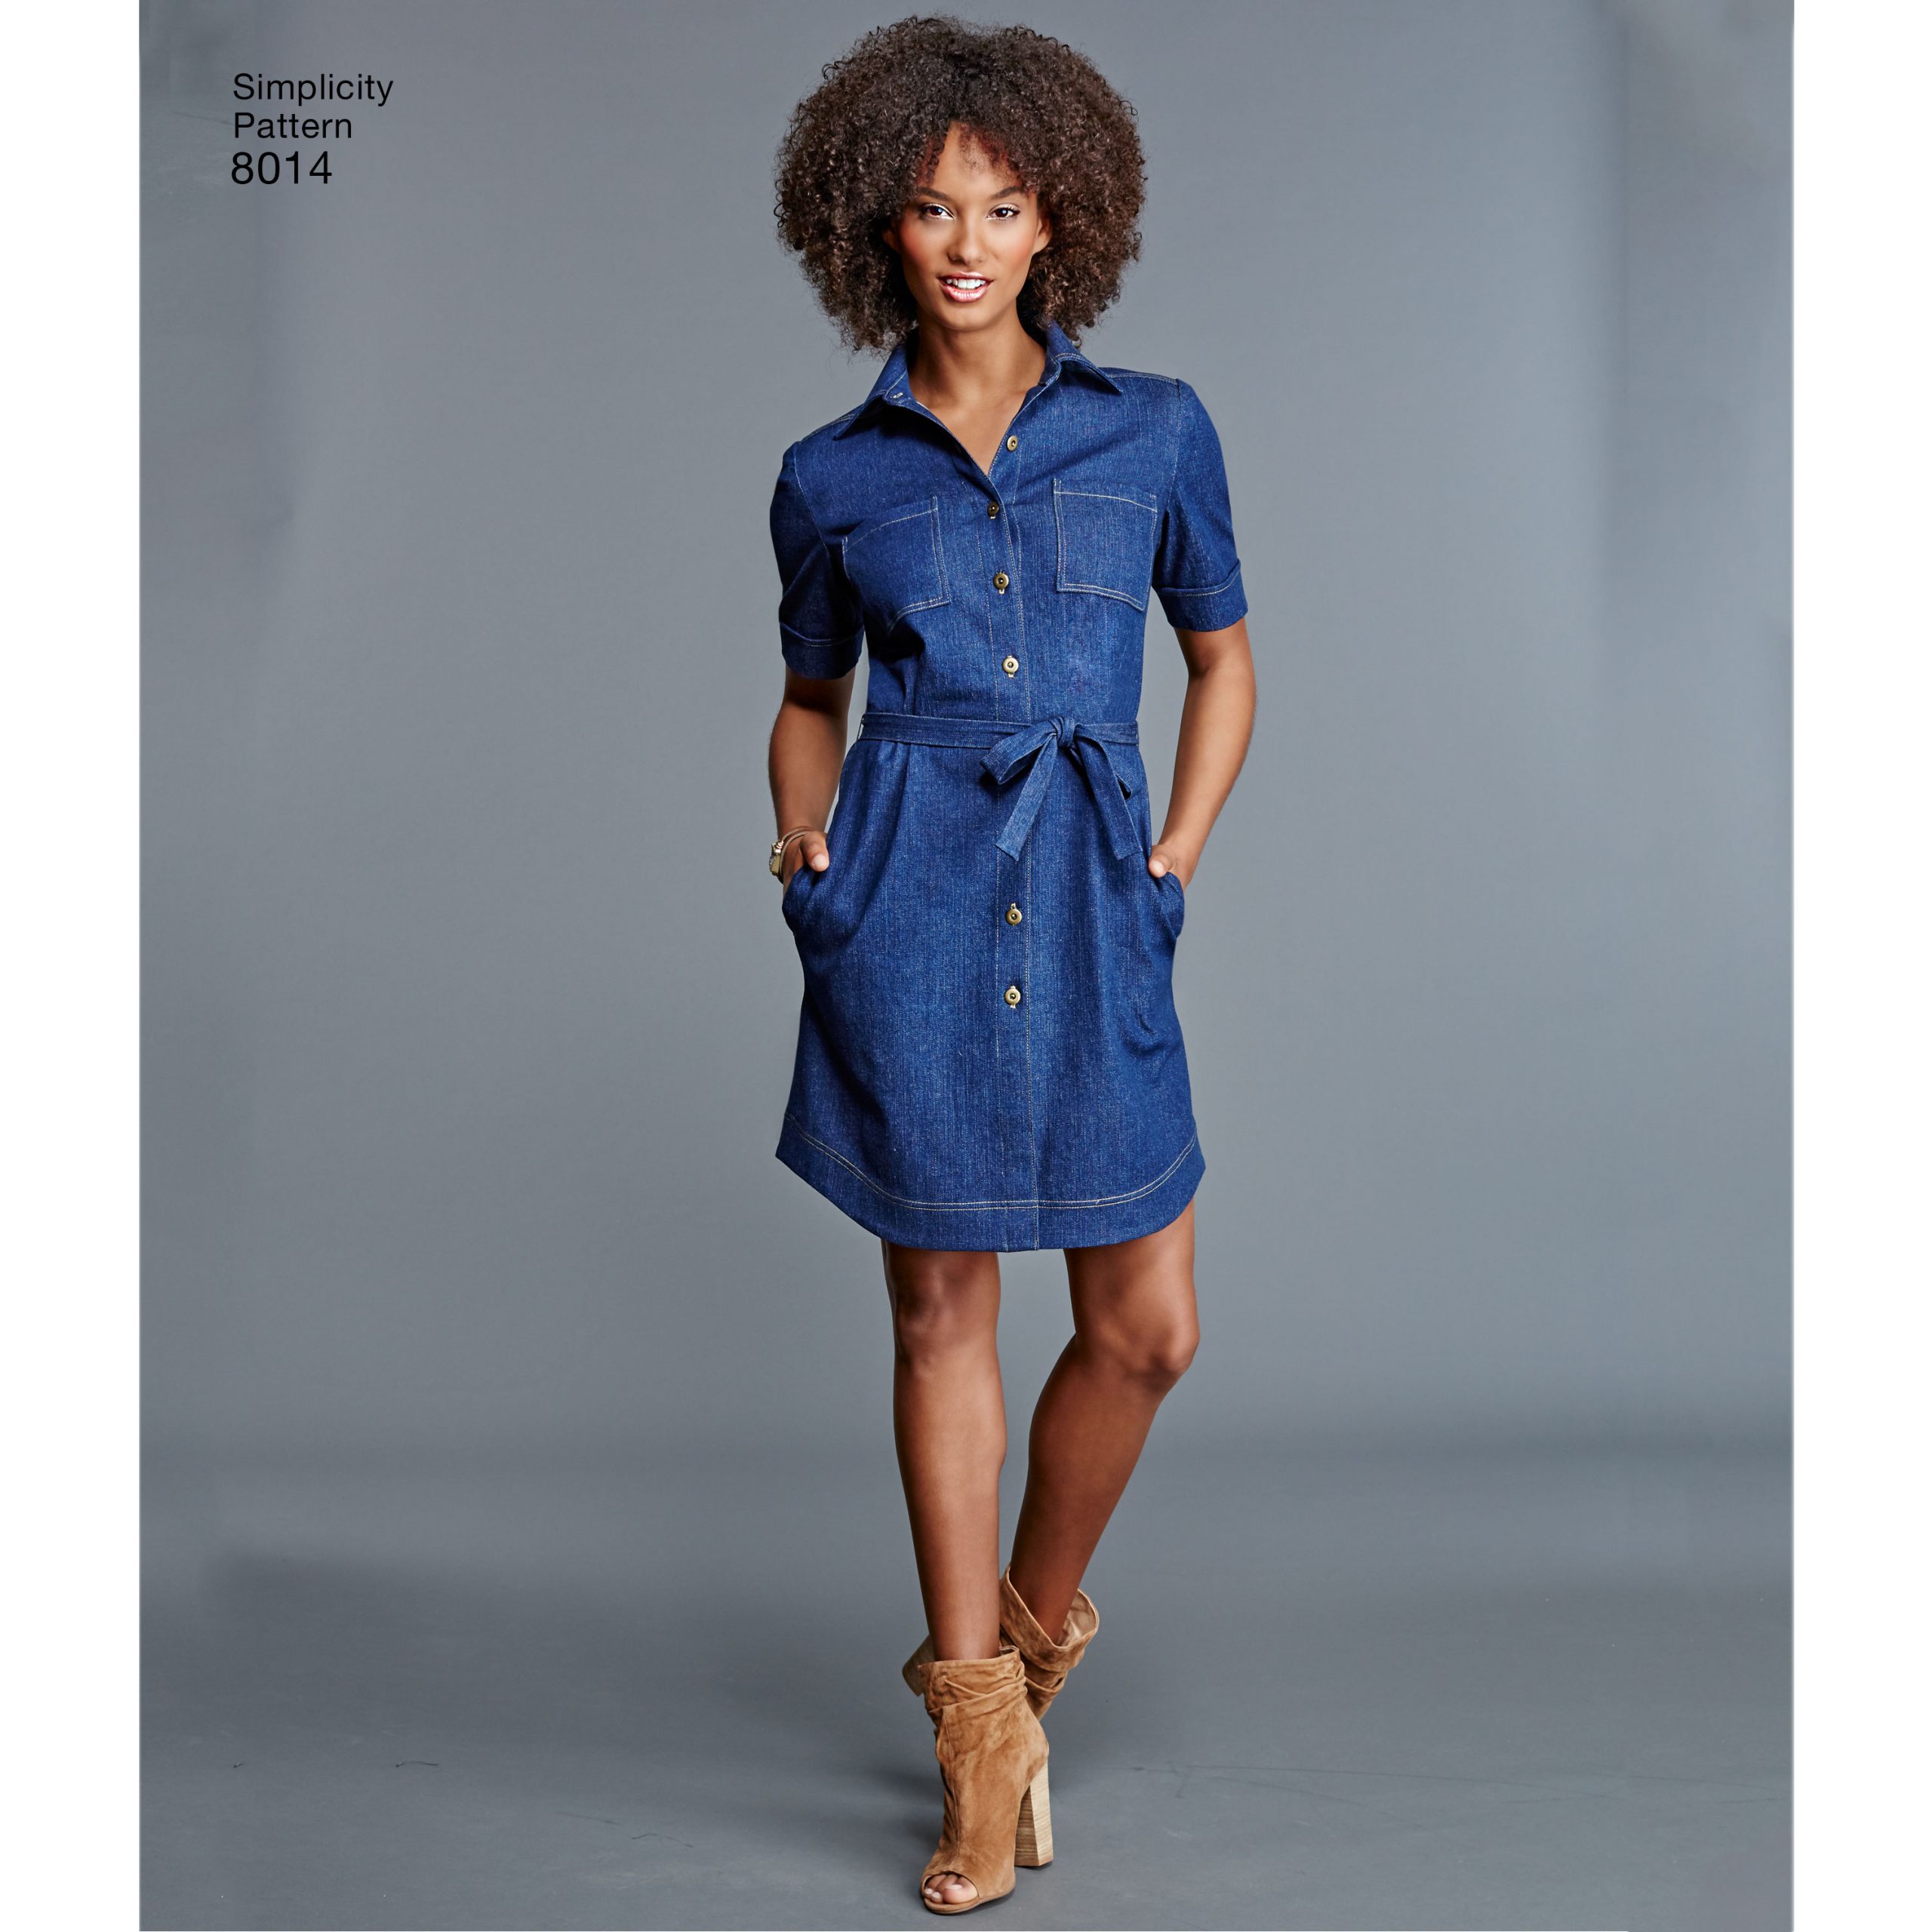 Chambray Shirt Dress Outfit Ideas - Fashion - Running in Heels